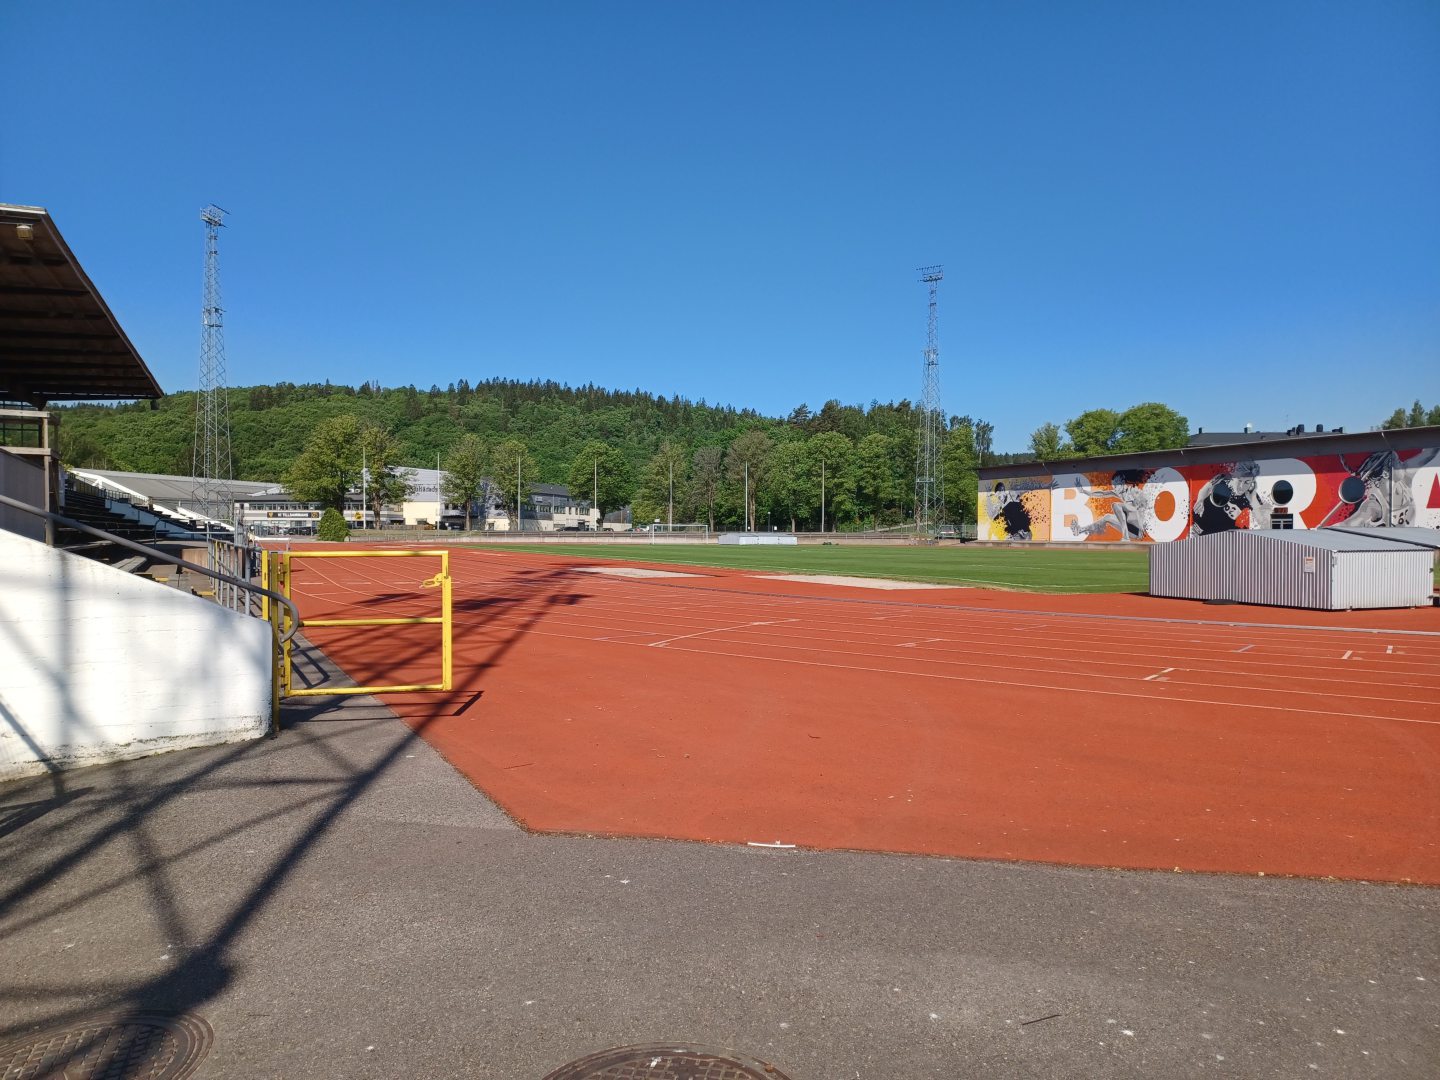 Elfsborg's original stadium which is joined to Boras Arena. Jimmy Thelin uses the pitch here to train before fixtures against teams with a grass pitch. Image: DC Thomson 